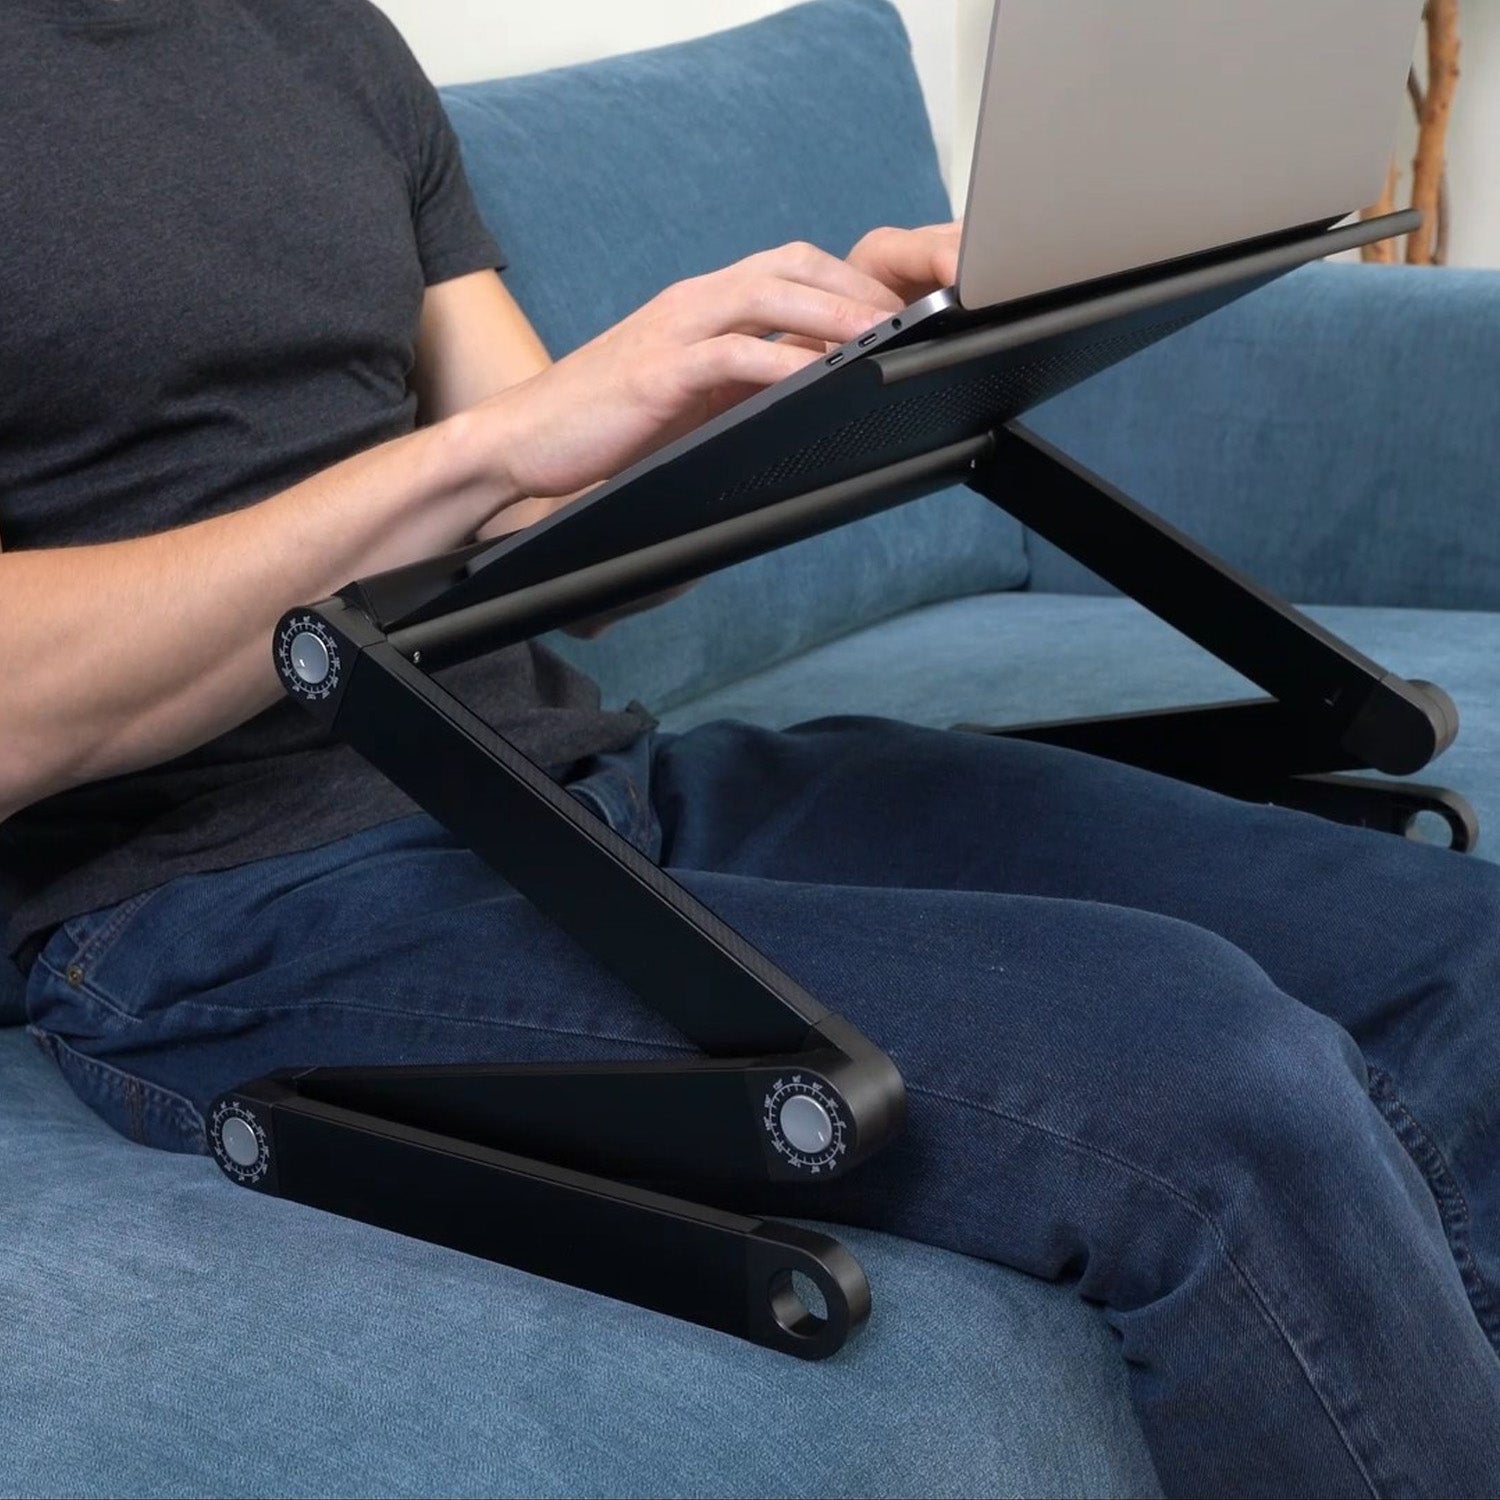 Laptop Stand, Laptop Stand for Bed, Adjustable Laptop Stand, Folding Laptop Stand, Cooling Tray, WonderWorker Nobel, 7